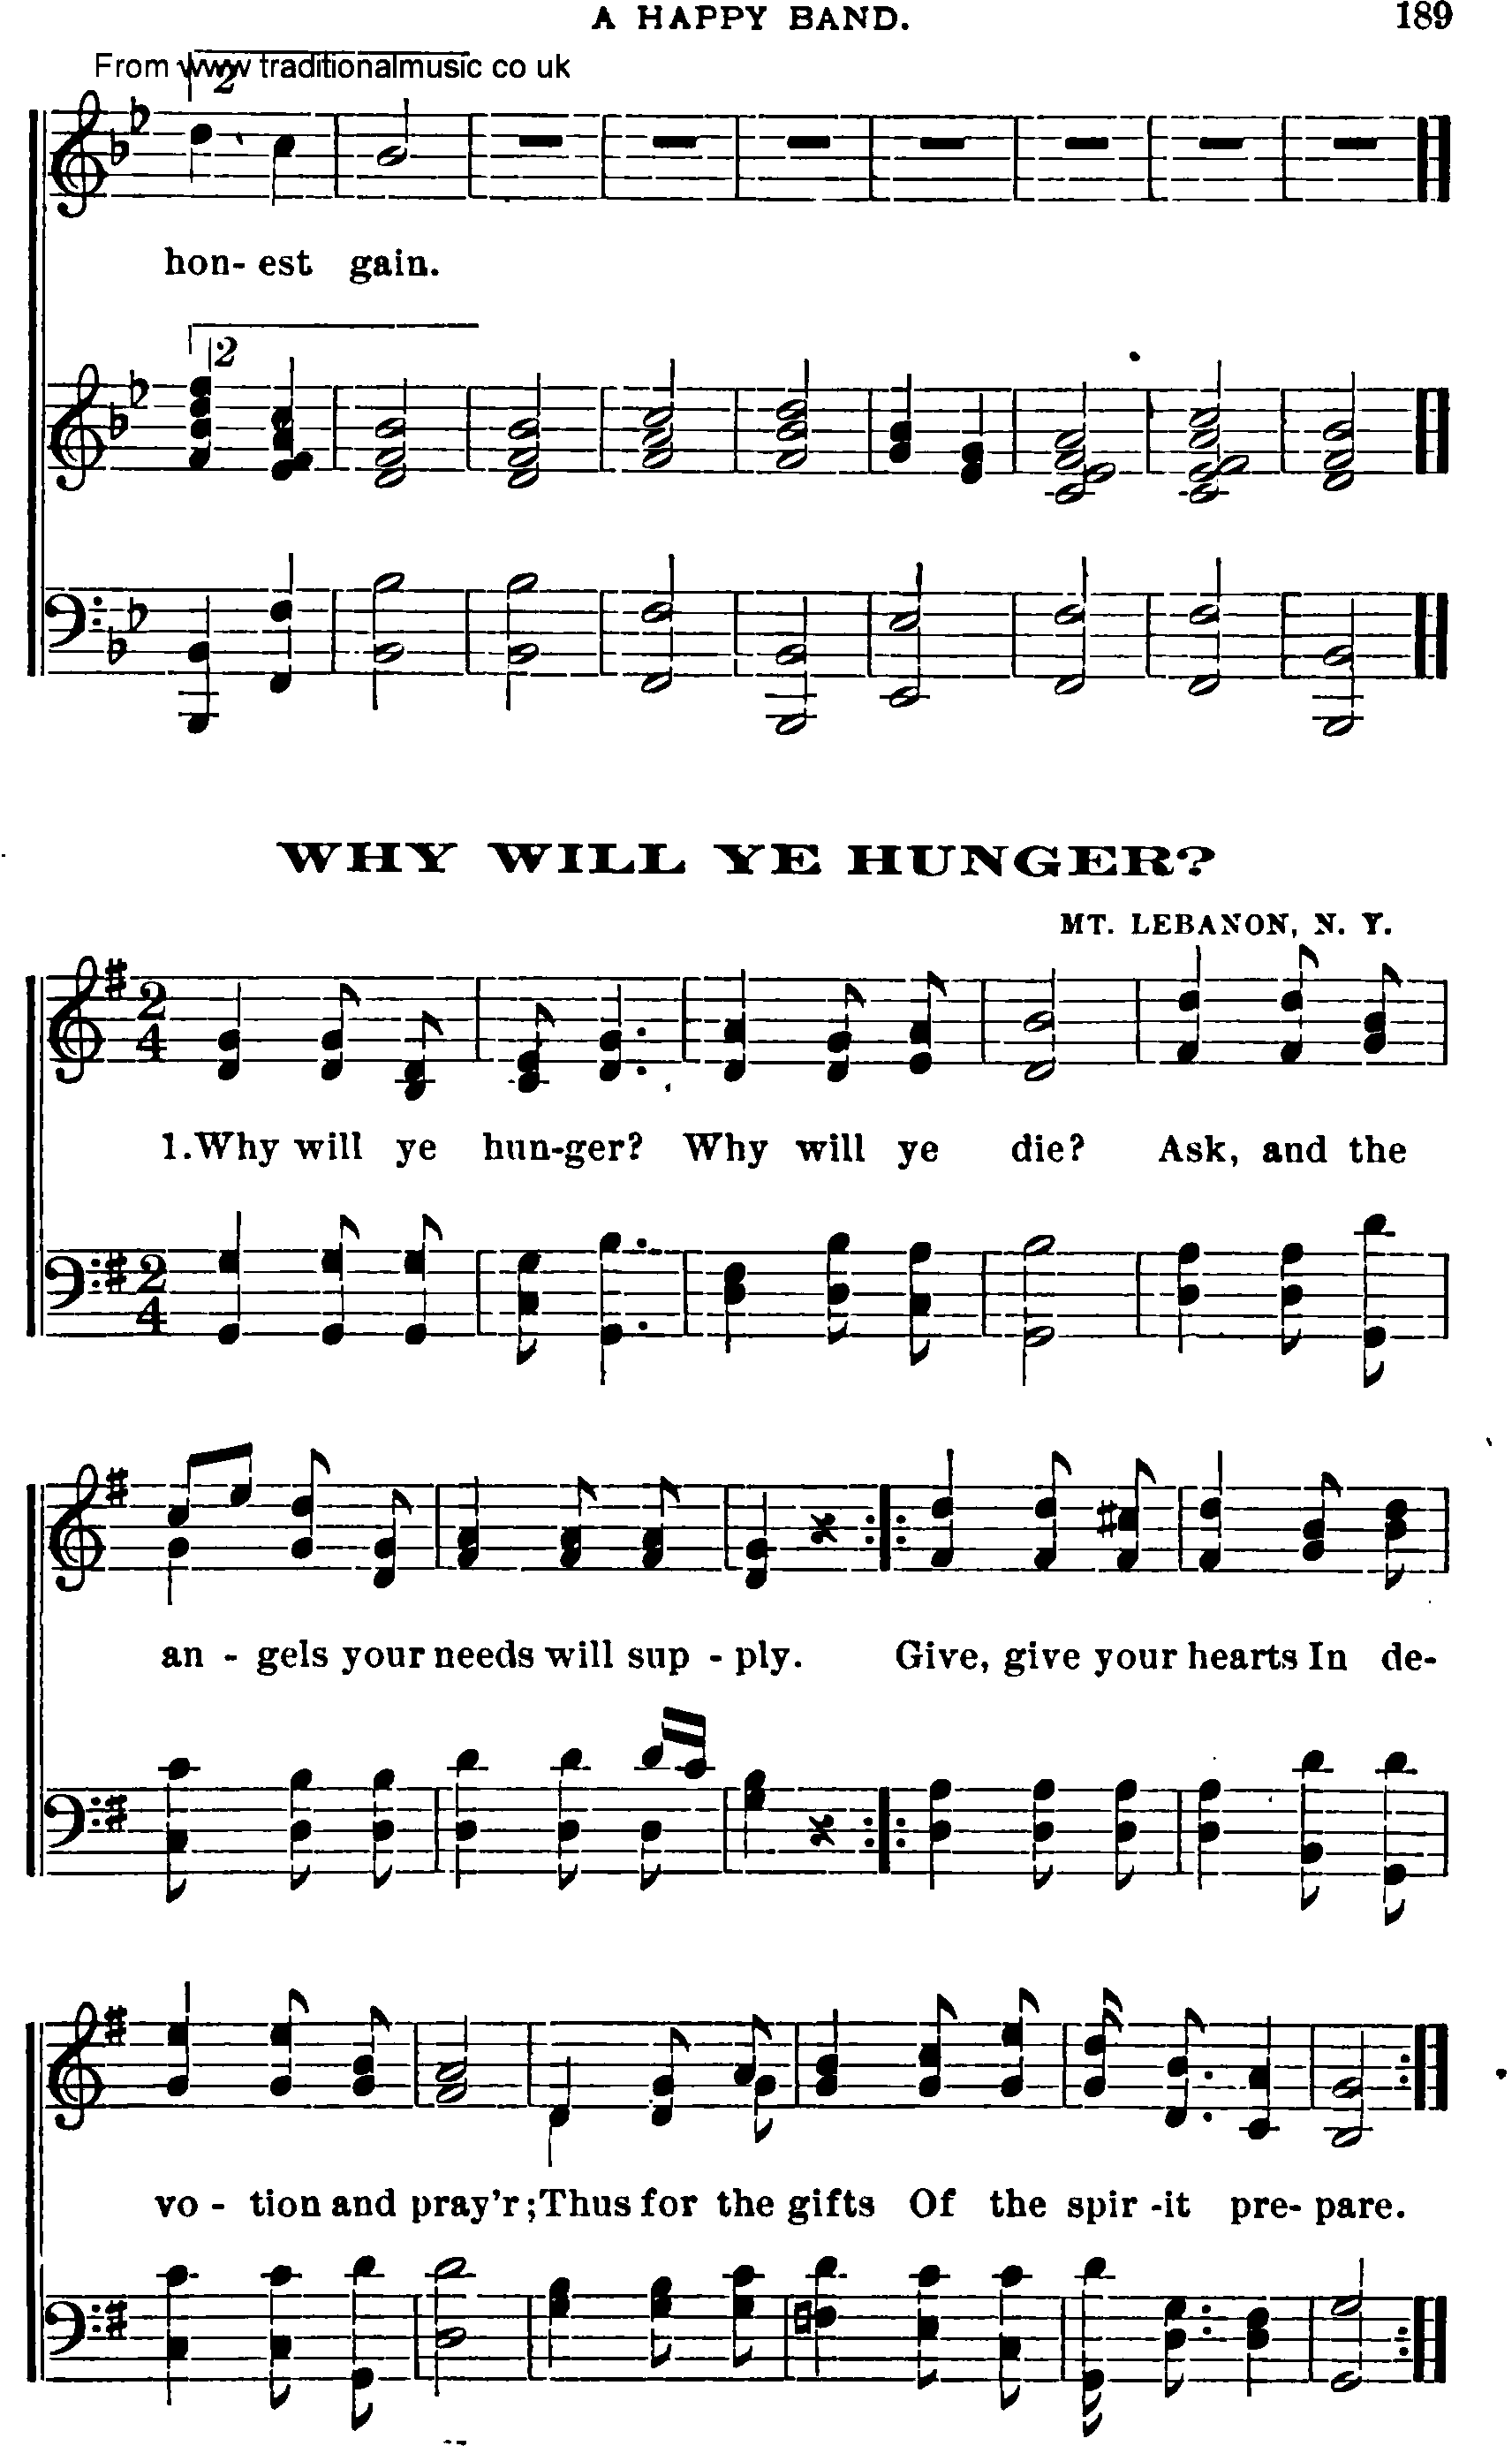 Shaker Music collection, Hymn: why will ye hunger, sheetmusic and PDF